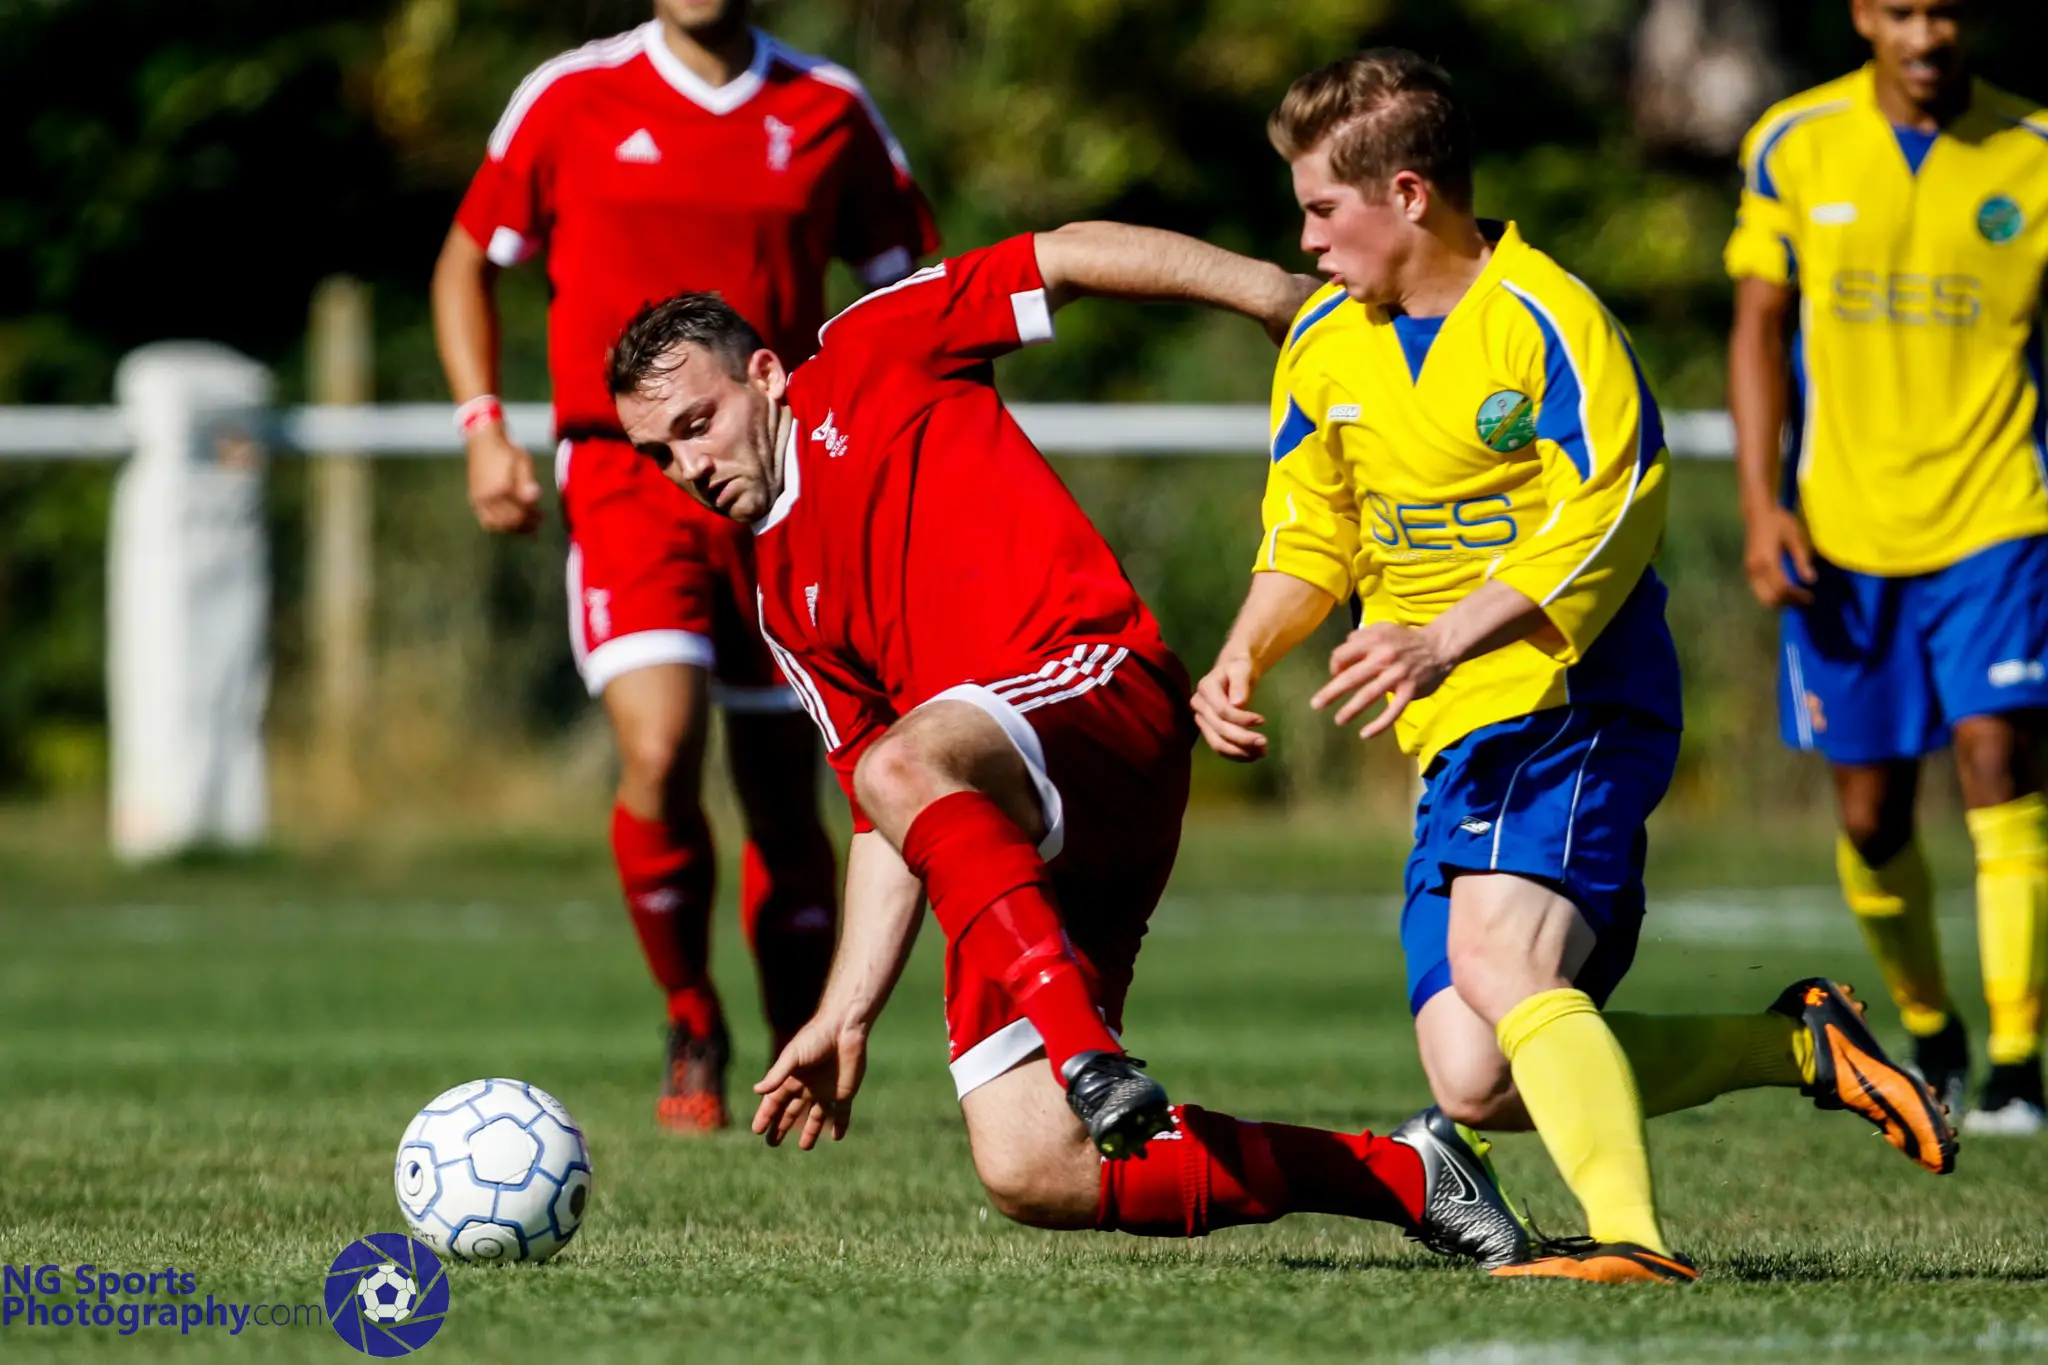 Bracknell Town FC and Ascot United FC in Uhlsport Hellenic Premier League action. Photo: Neil Graham.